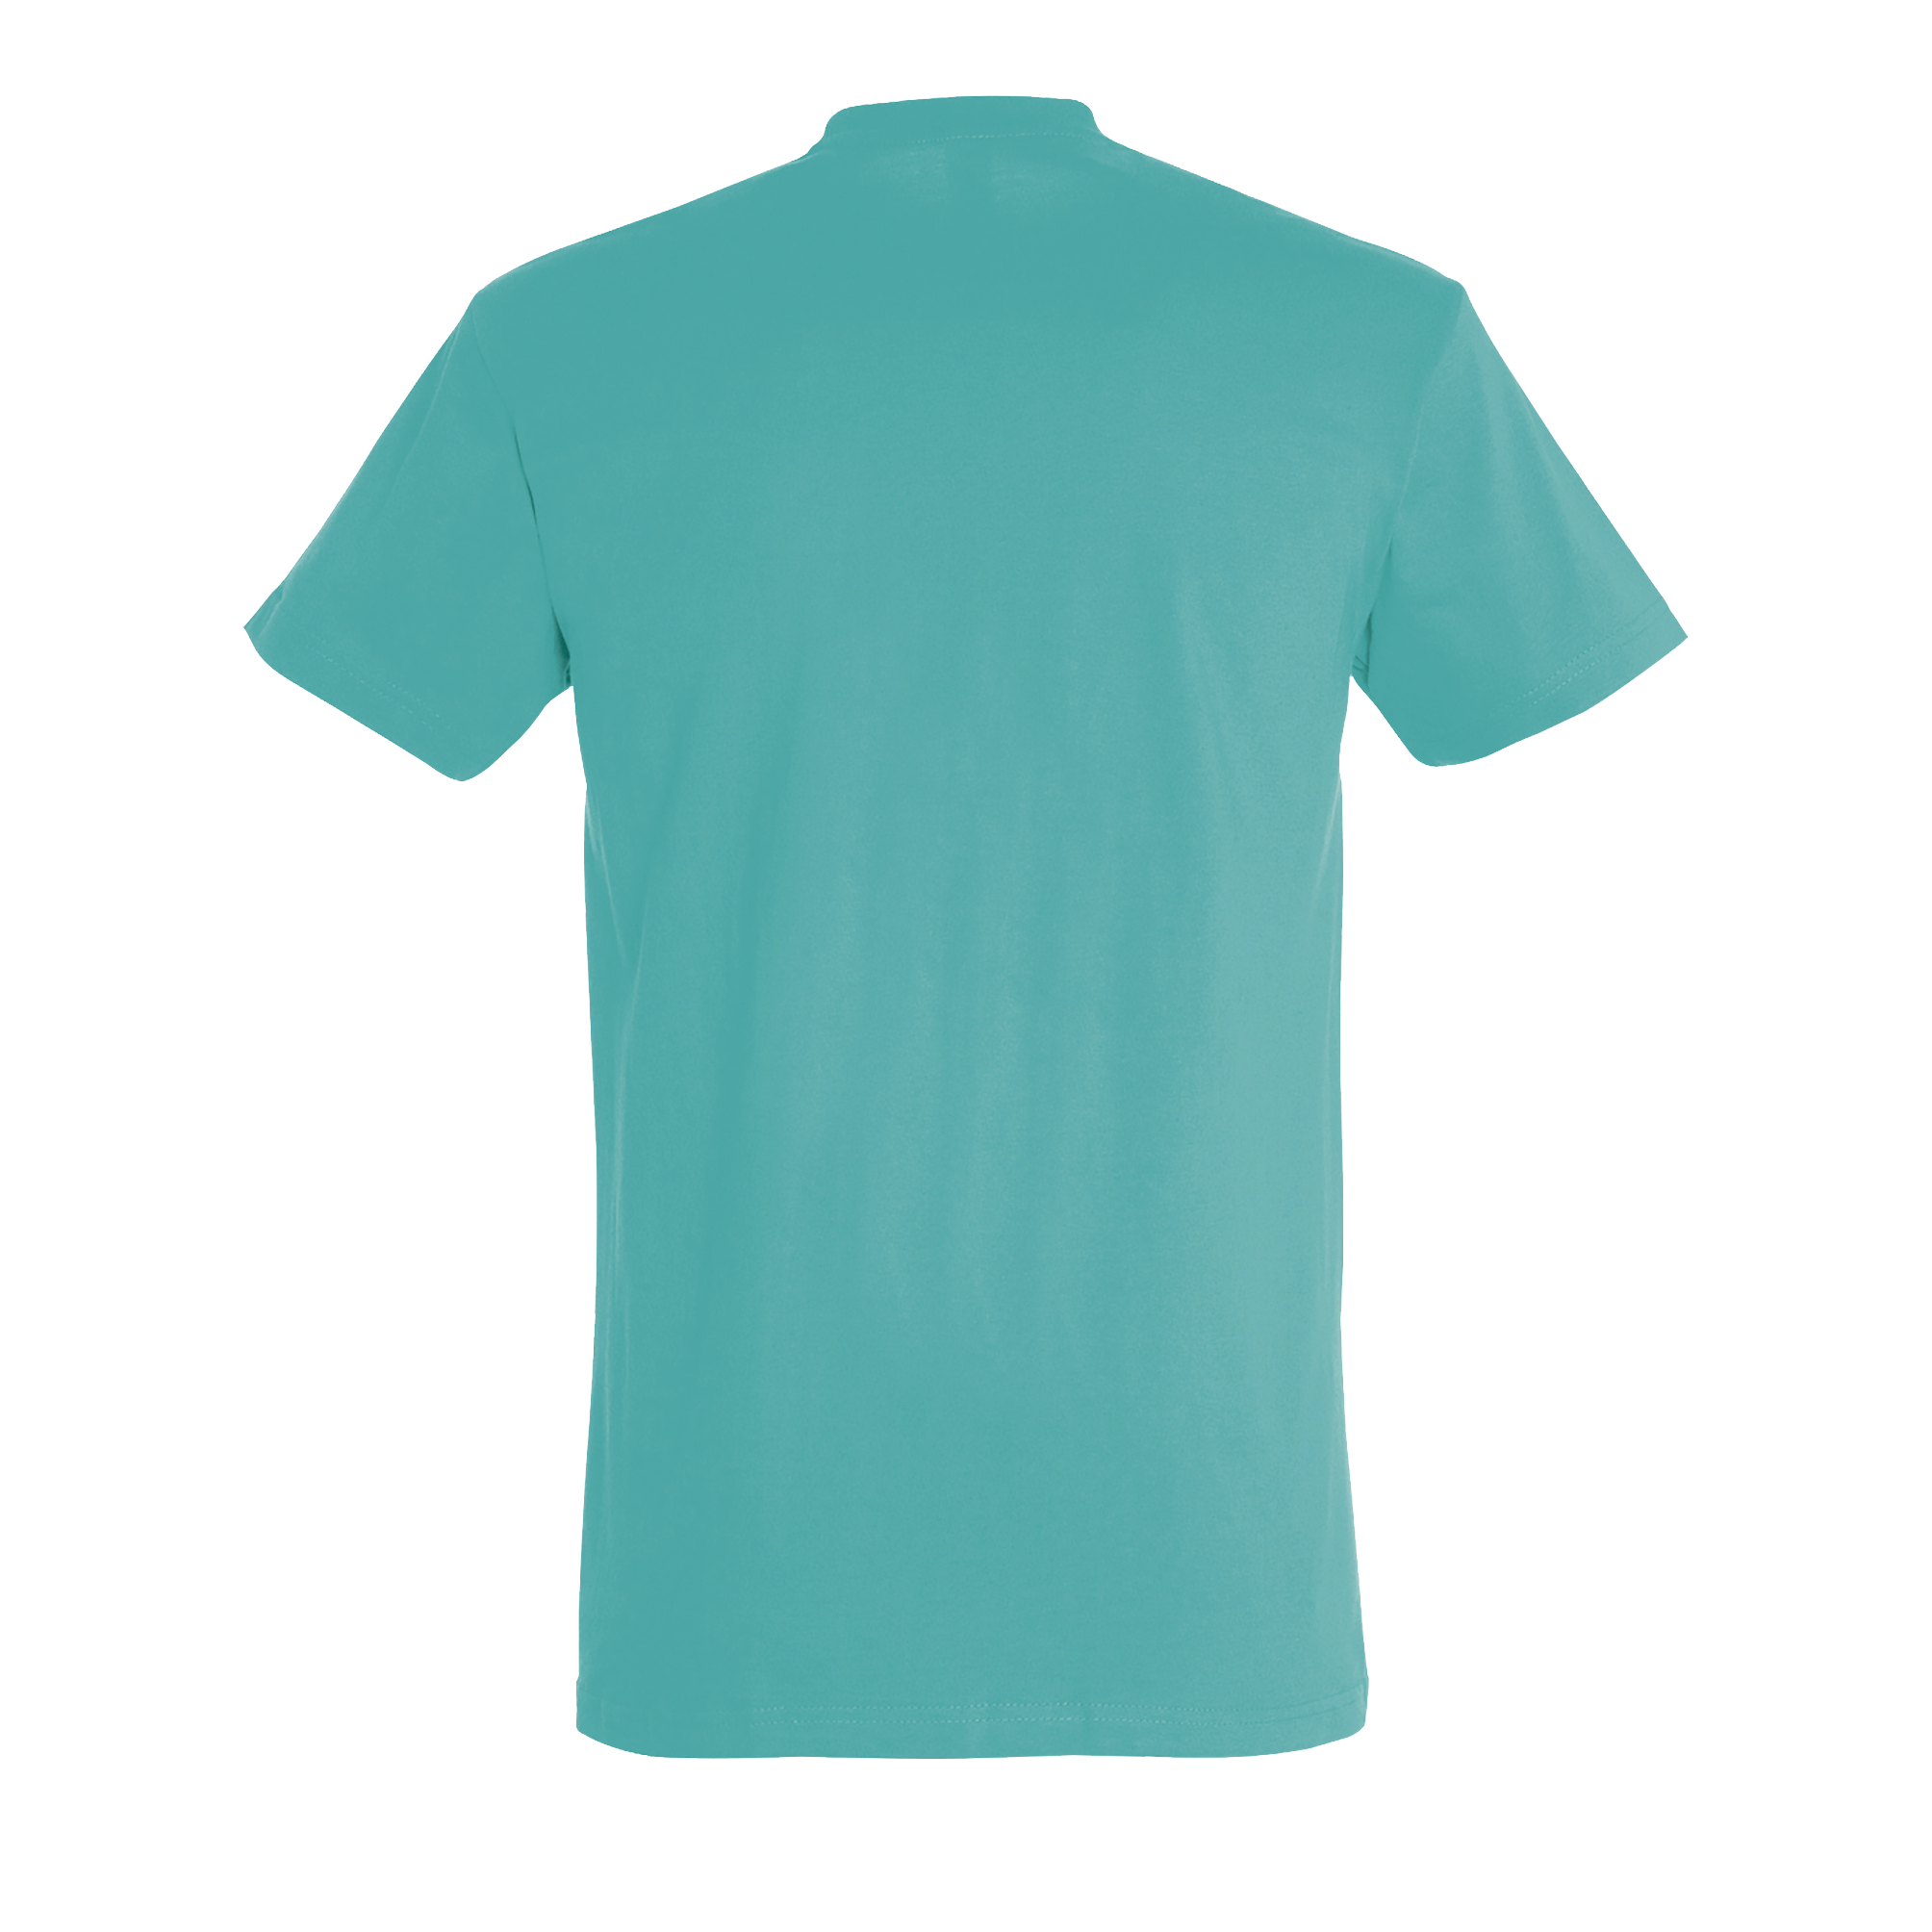 images/stories/virtuemart/sols20/2467_teeshirt_homme_col_rond_imperial_apple_green_dos